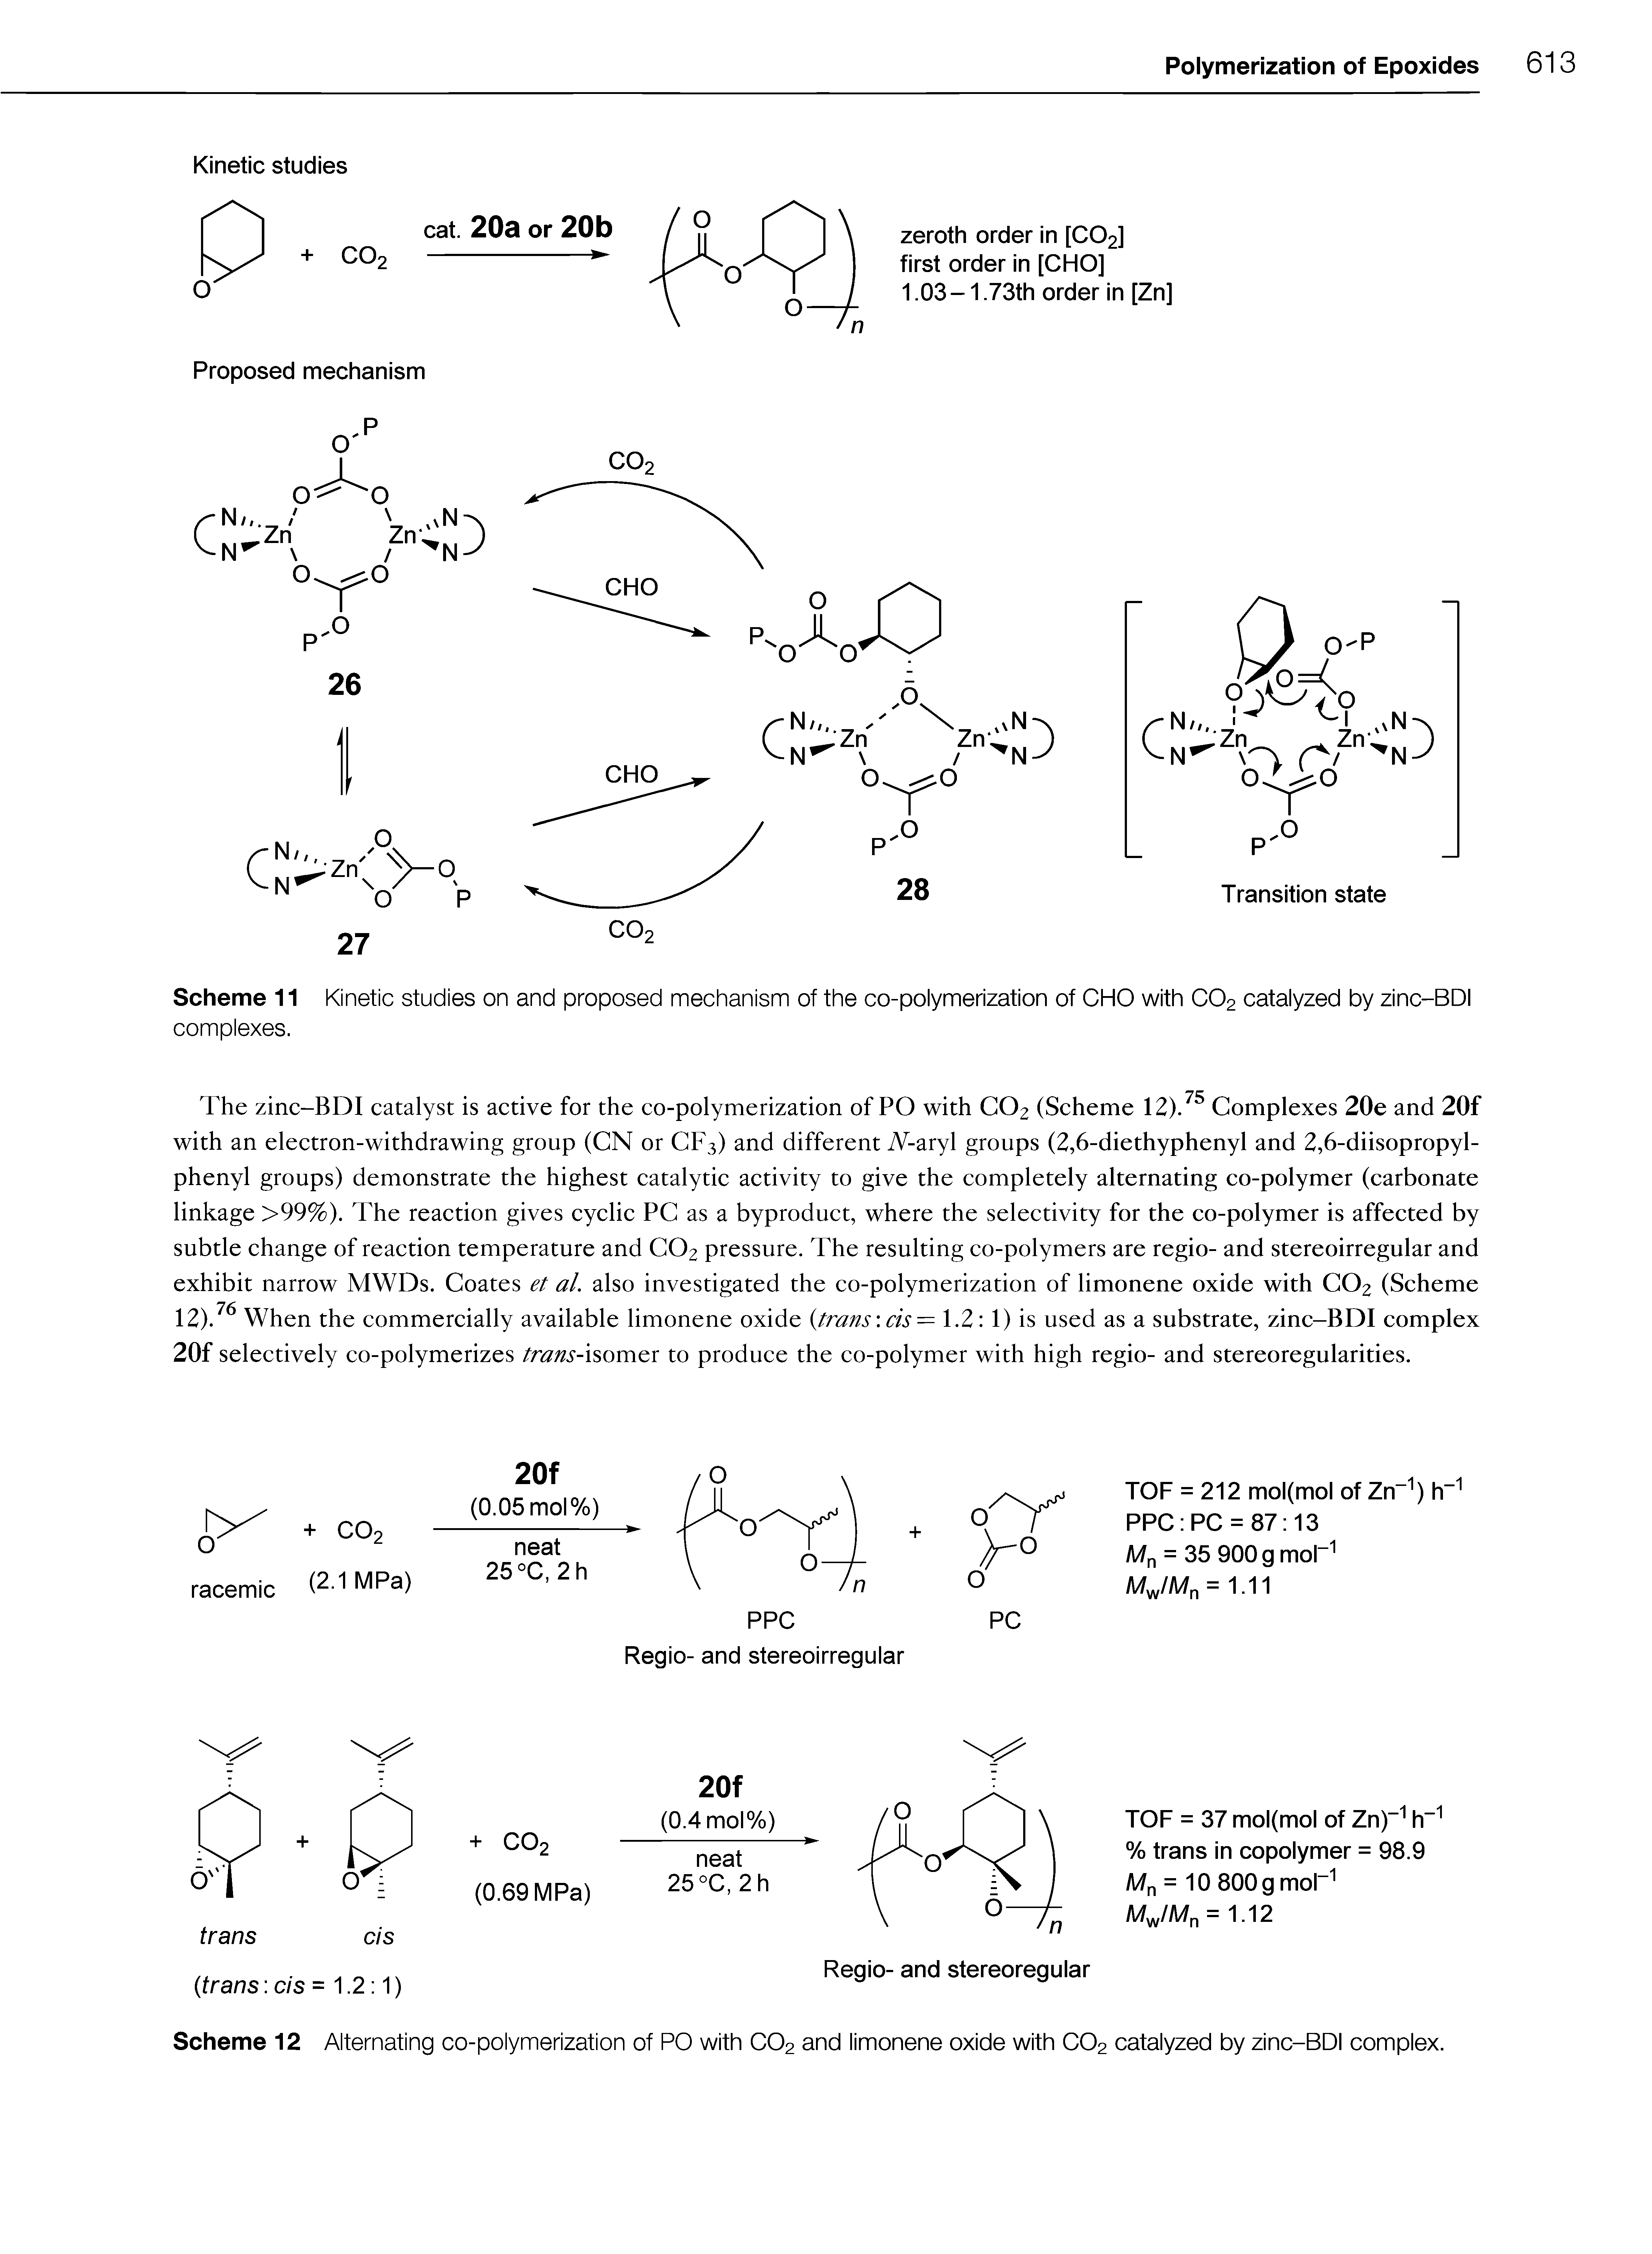 Scheme 12 Alternating co-polymerization of PO with CO2 and limonene oxide with CO2 catalyzed by zinc-BDI complex.